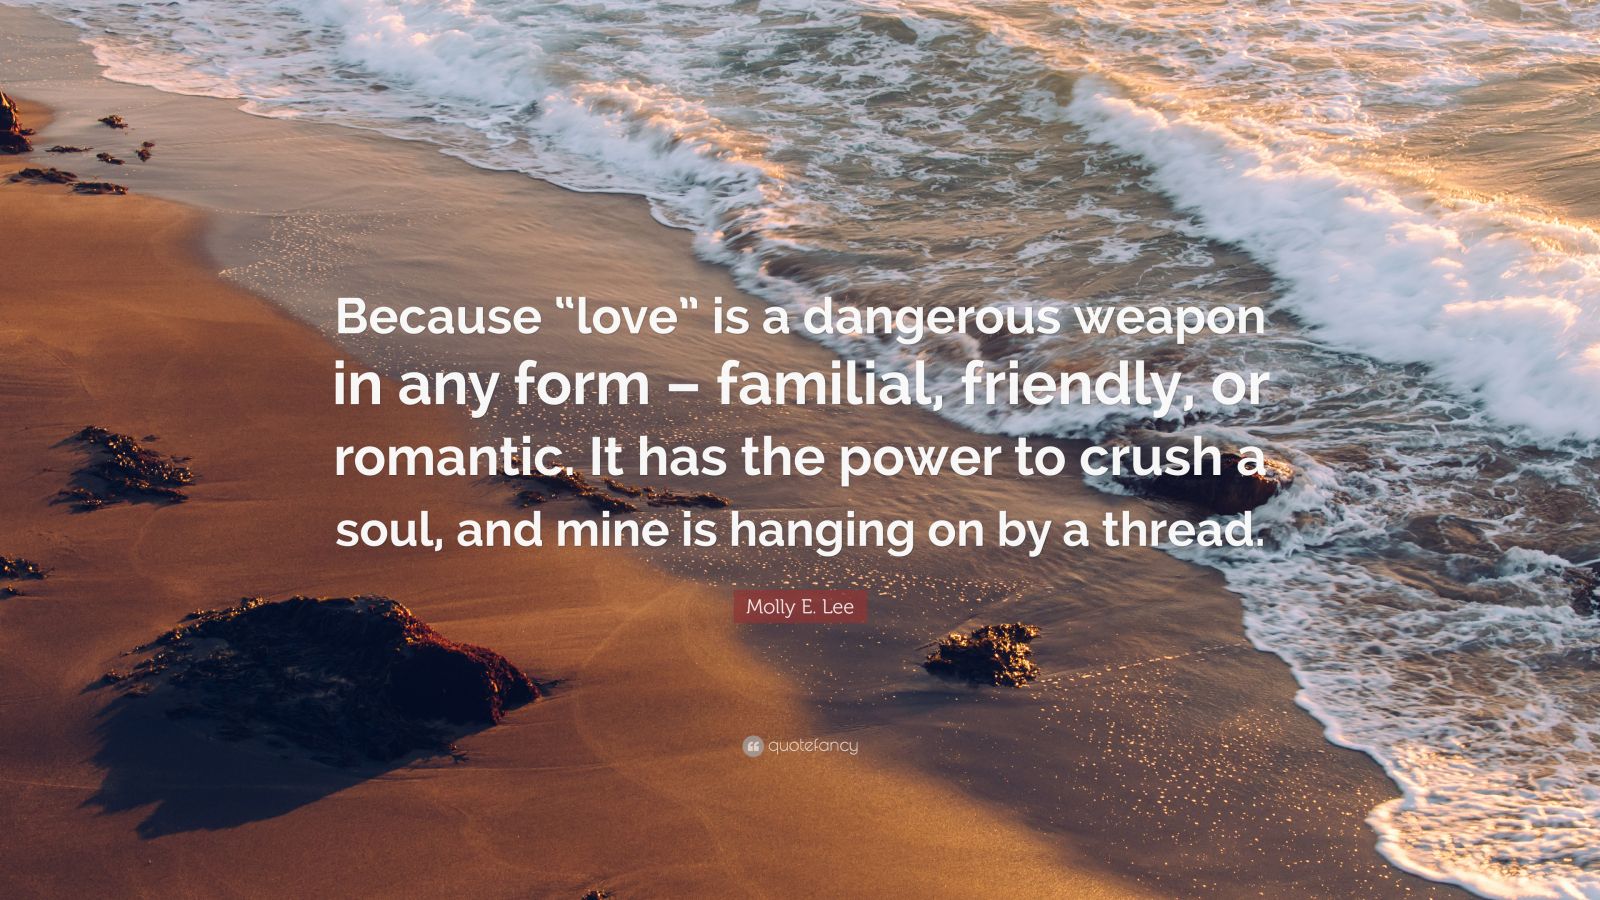 Molly E. Lee Quote: “Because “love” is a dangerous weapon in any form ...